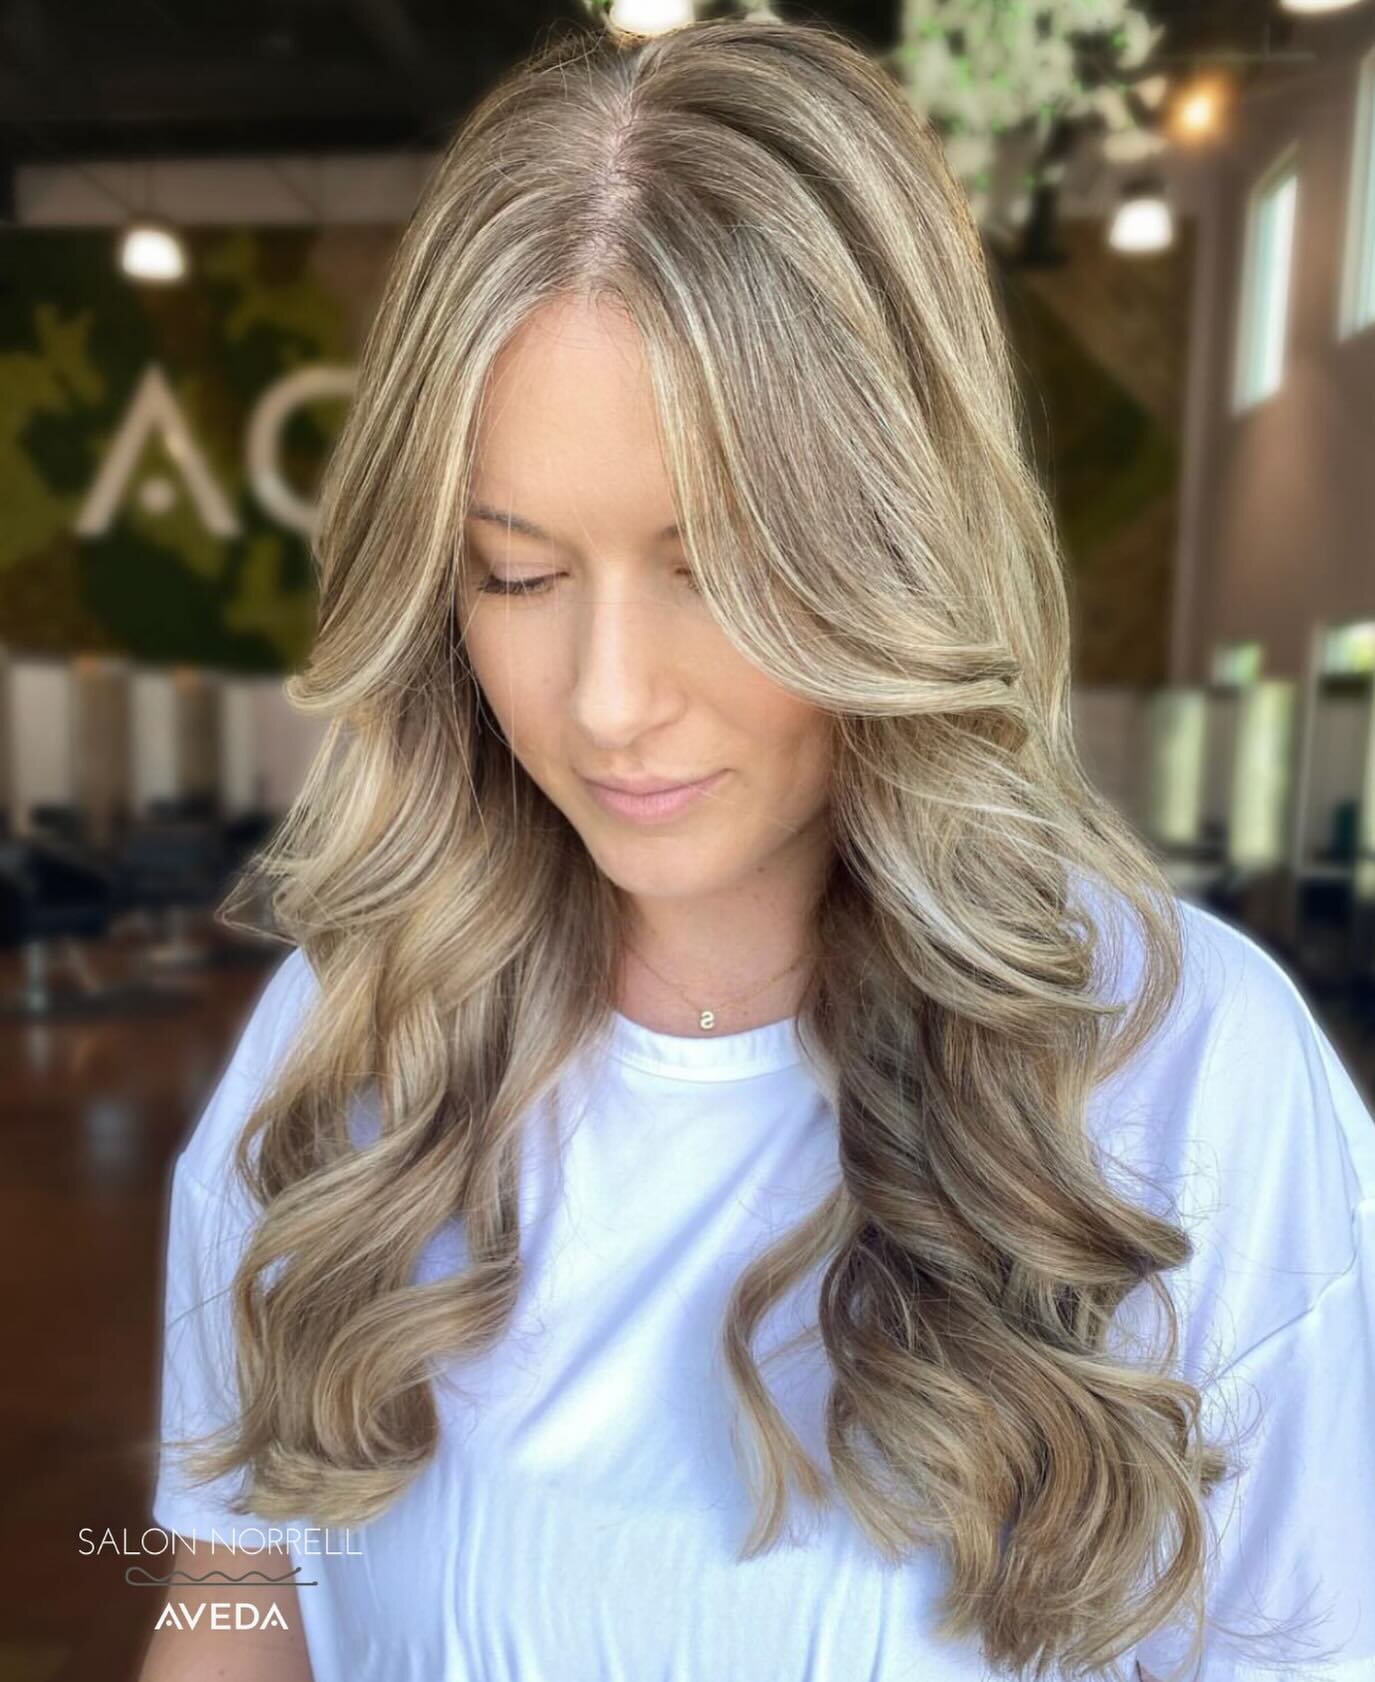 Hair | jessica 
Make your reservation today! 
🗓Reservations are best 
📲Text 813-590-6765 
☎️Call 813-265-2000 
🔗 Link in bio to book online 
💻TampaAveda.com 
📍Tampa, Florida 
🏷 tag us #salonnorrell